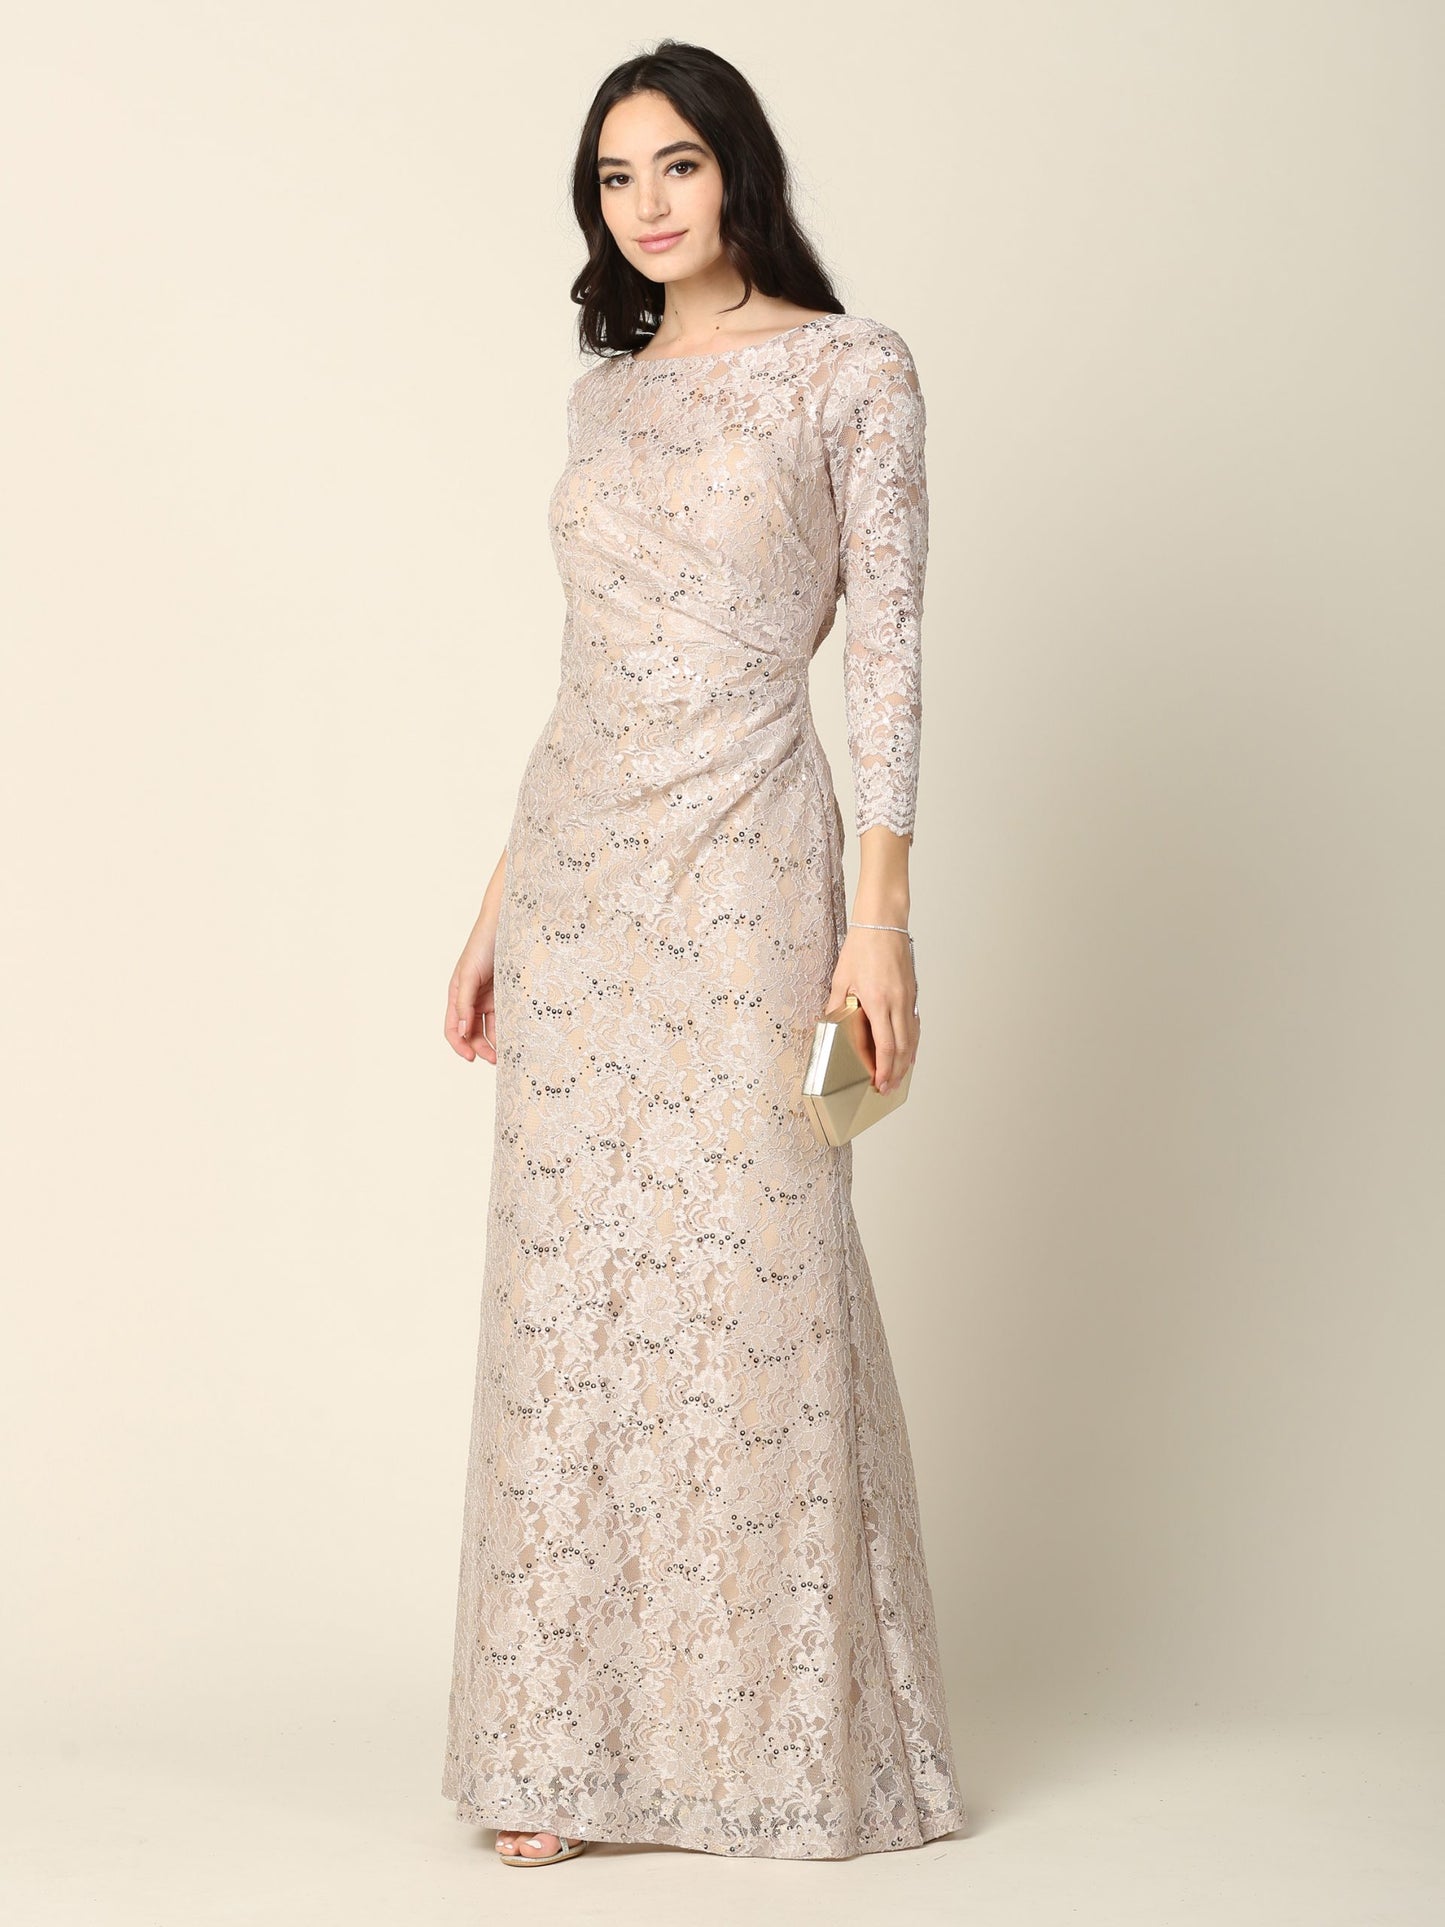 EA24-3397 SHEATH 3/4 SLEEVE LACE DRESS WITH RUCHING DETAILS